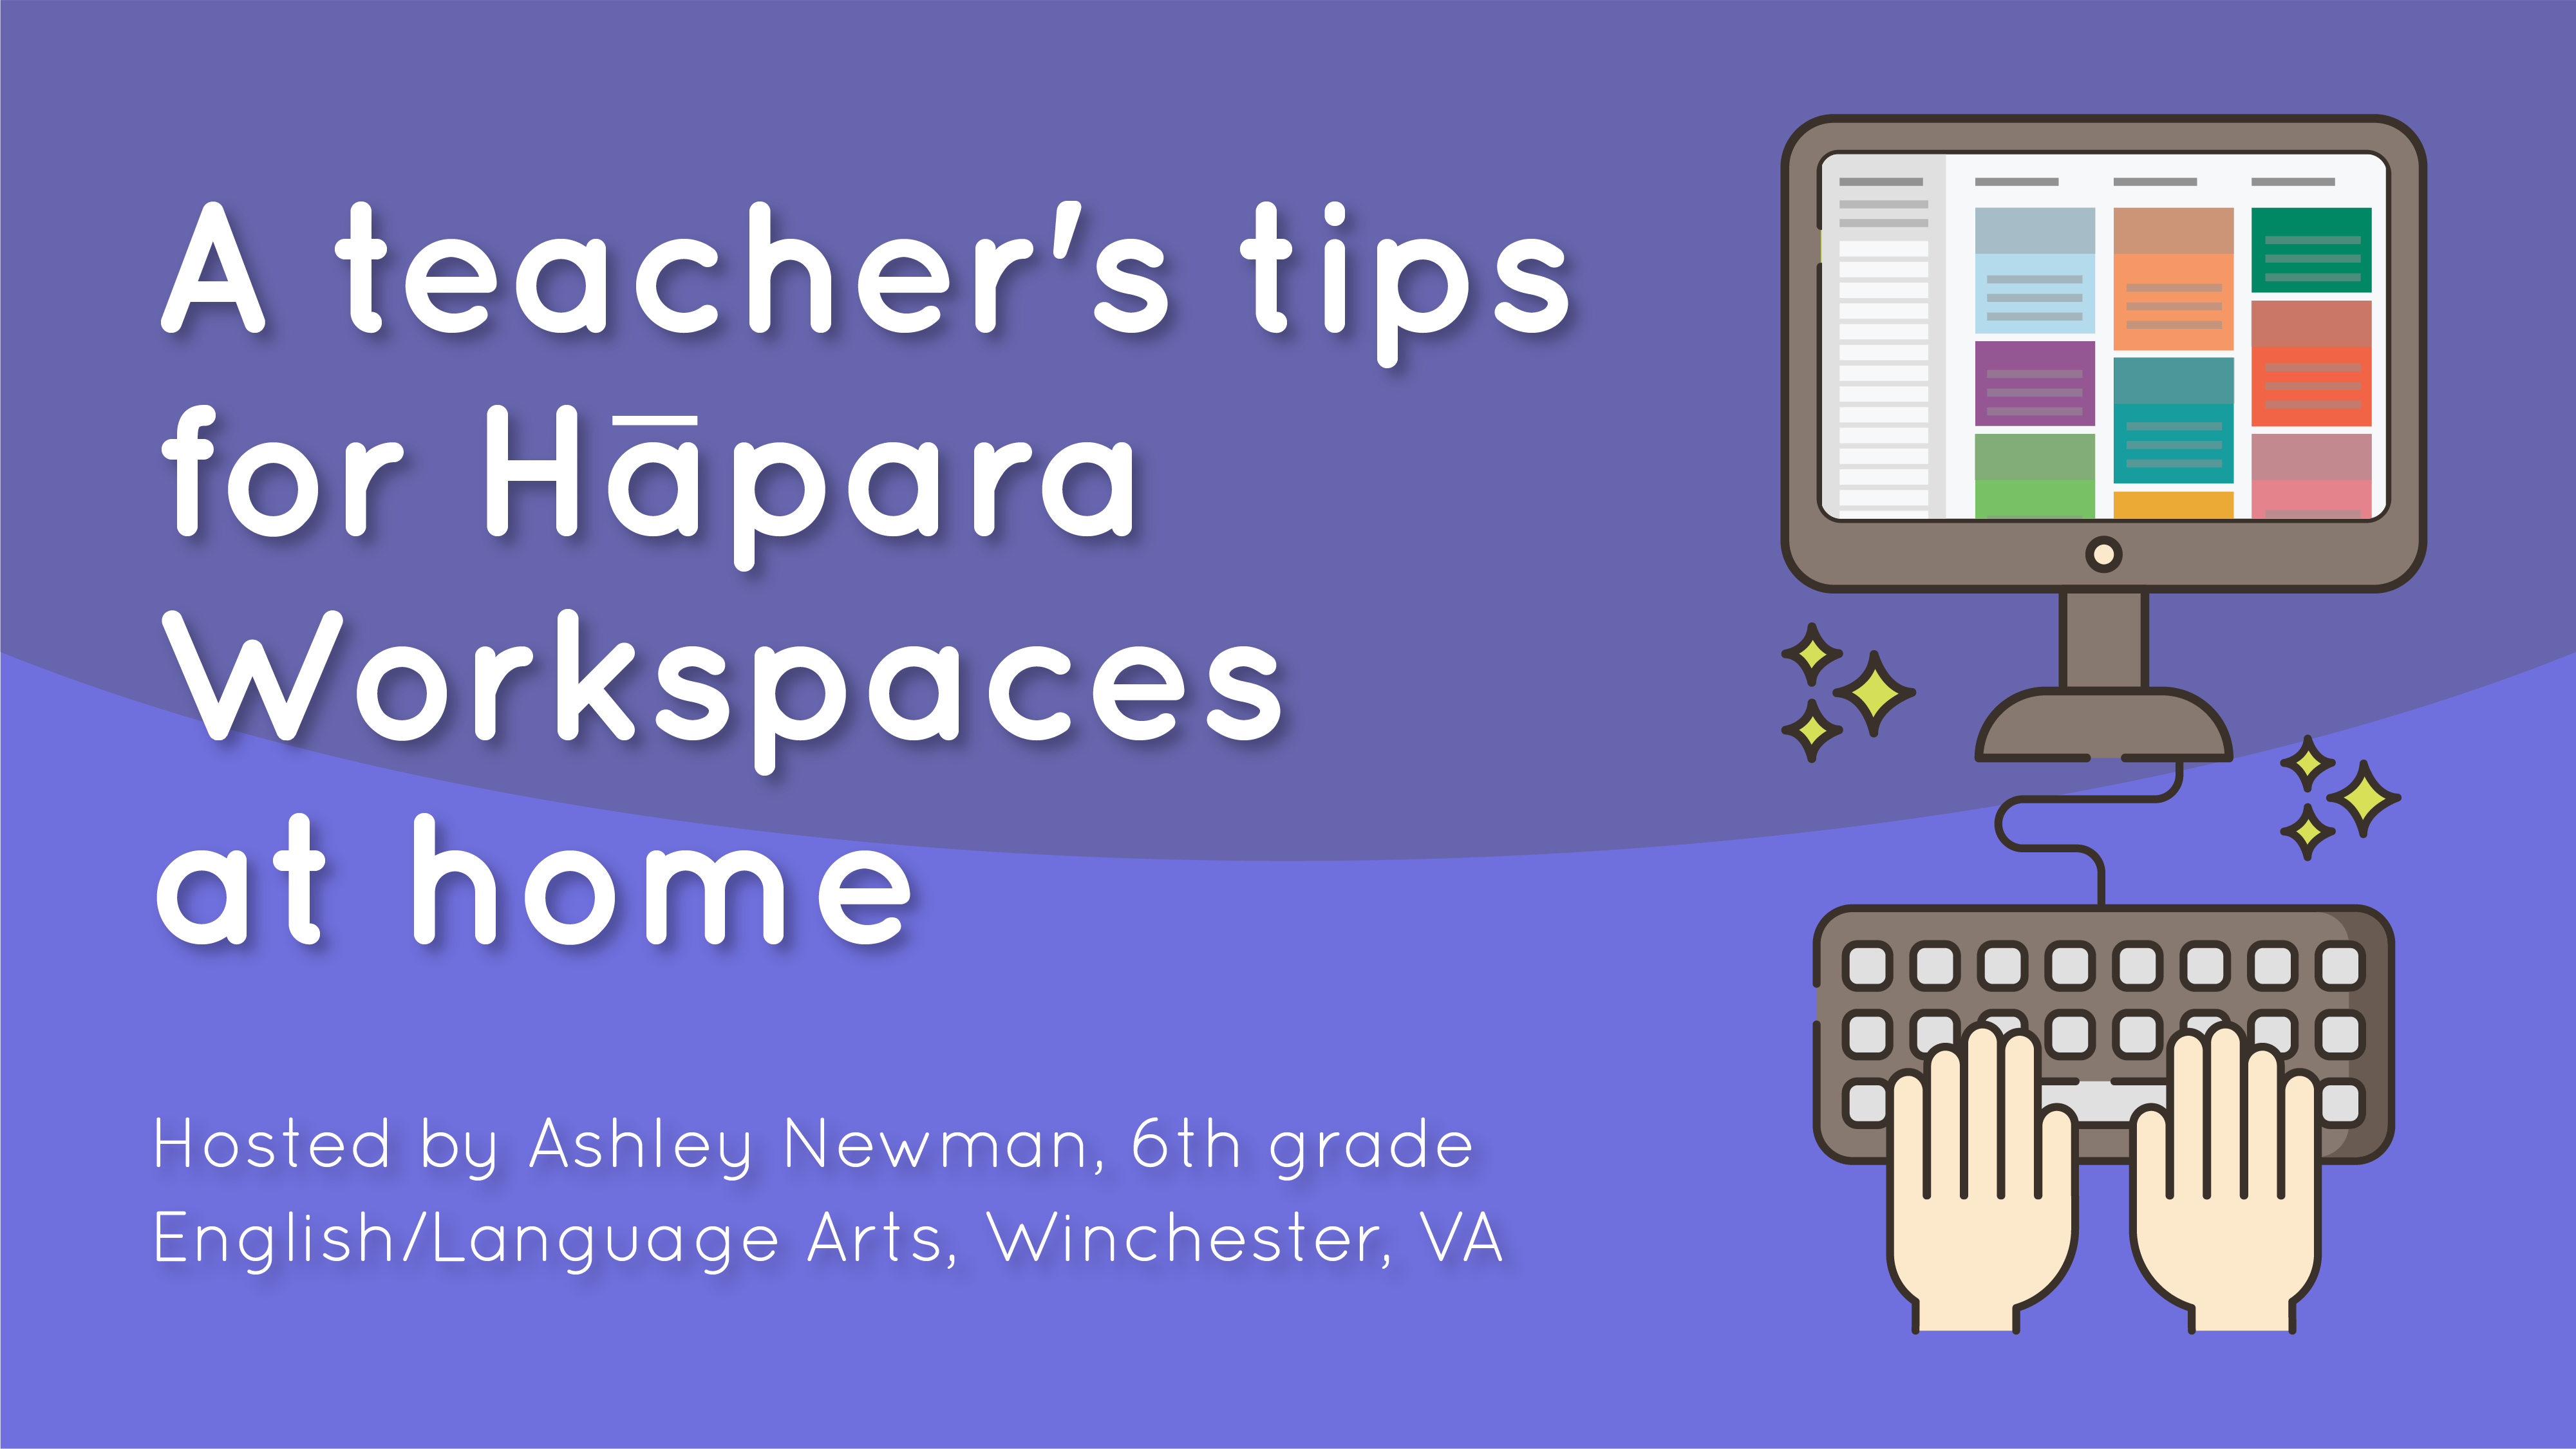 A teacher's tips for Hāpara Workspaces at home